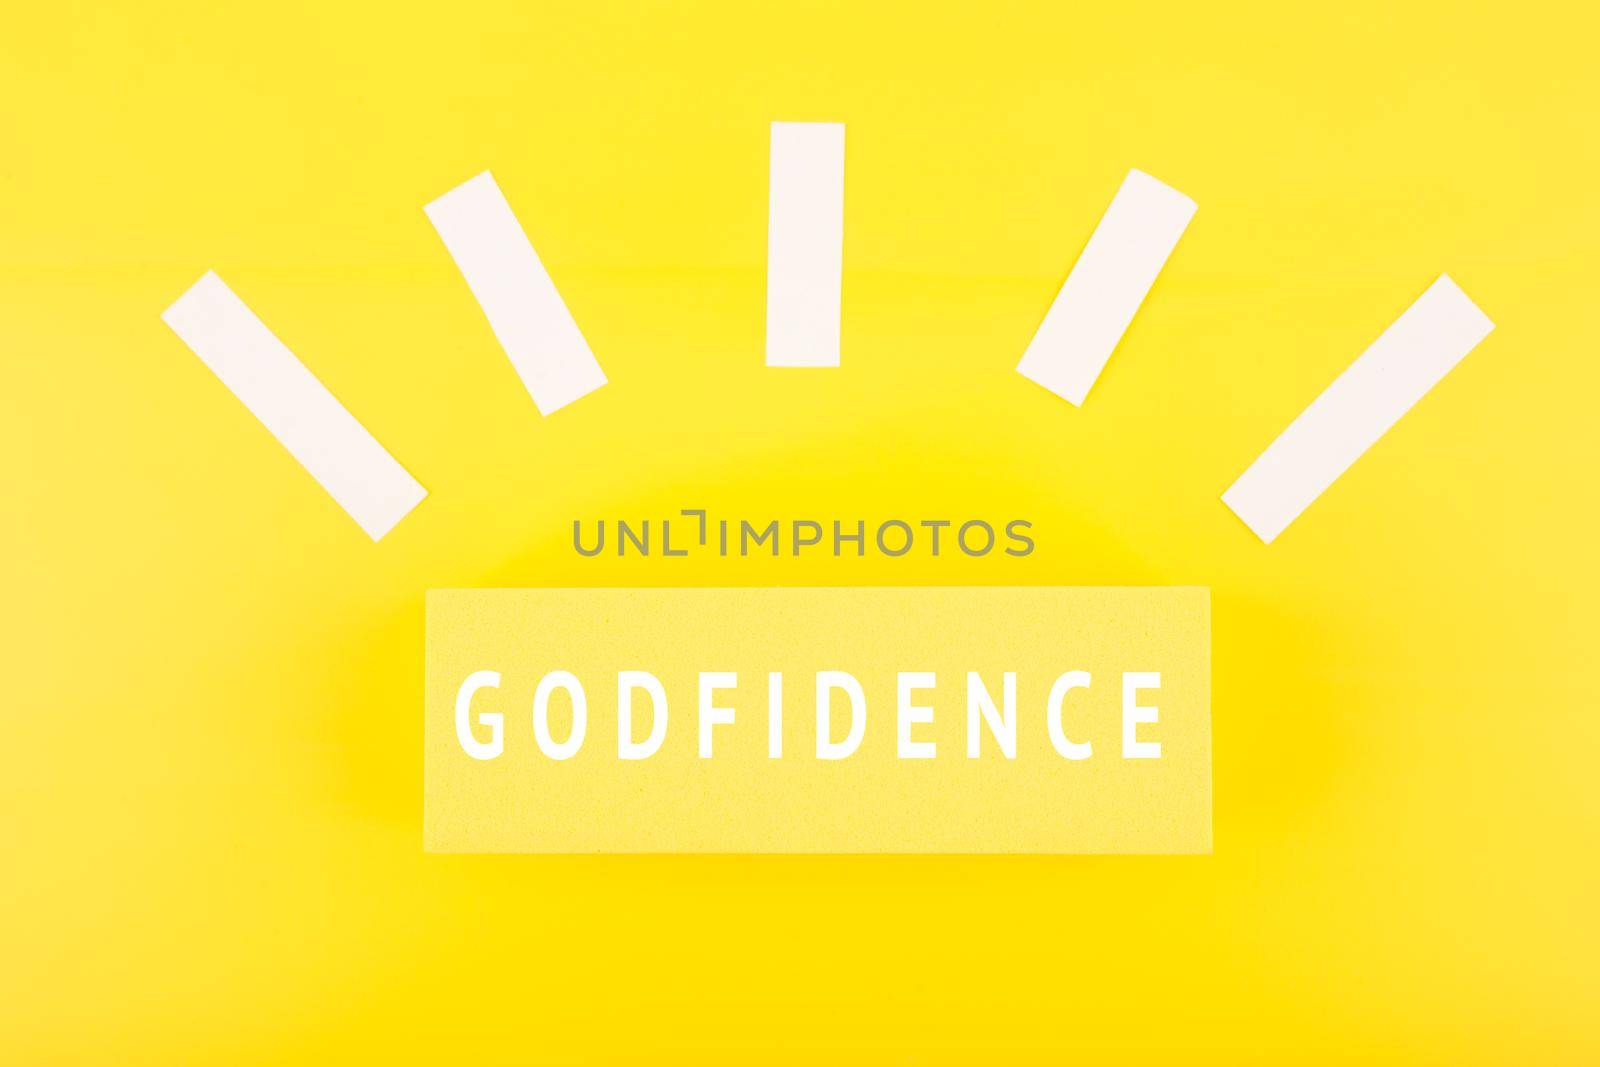 Godfidence single word against bright yellow background with rays of light made of paper. Modern biblical creative religious concept 